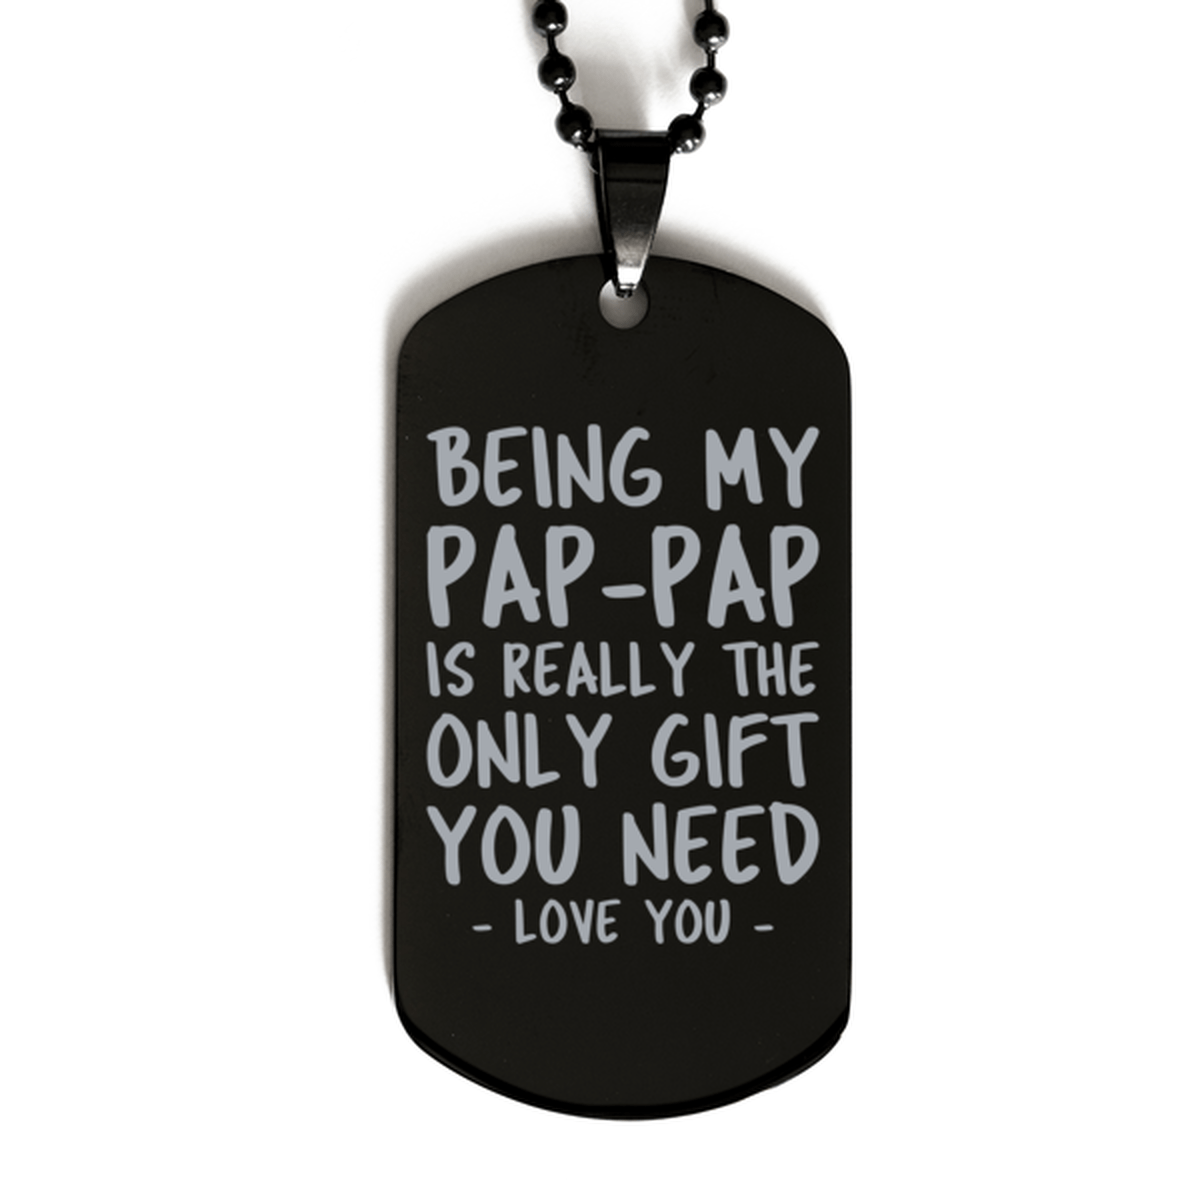 Funny Pap-pap Black Dog Tag Necklace, Being My Pap-pap Is Really the Only Gift You Need, Best Birthday Gifts for Pap-pap